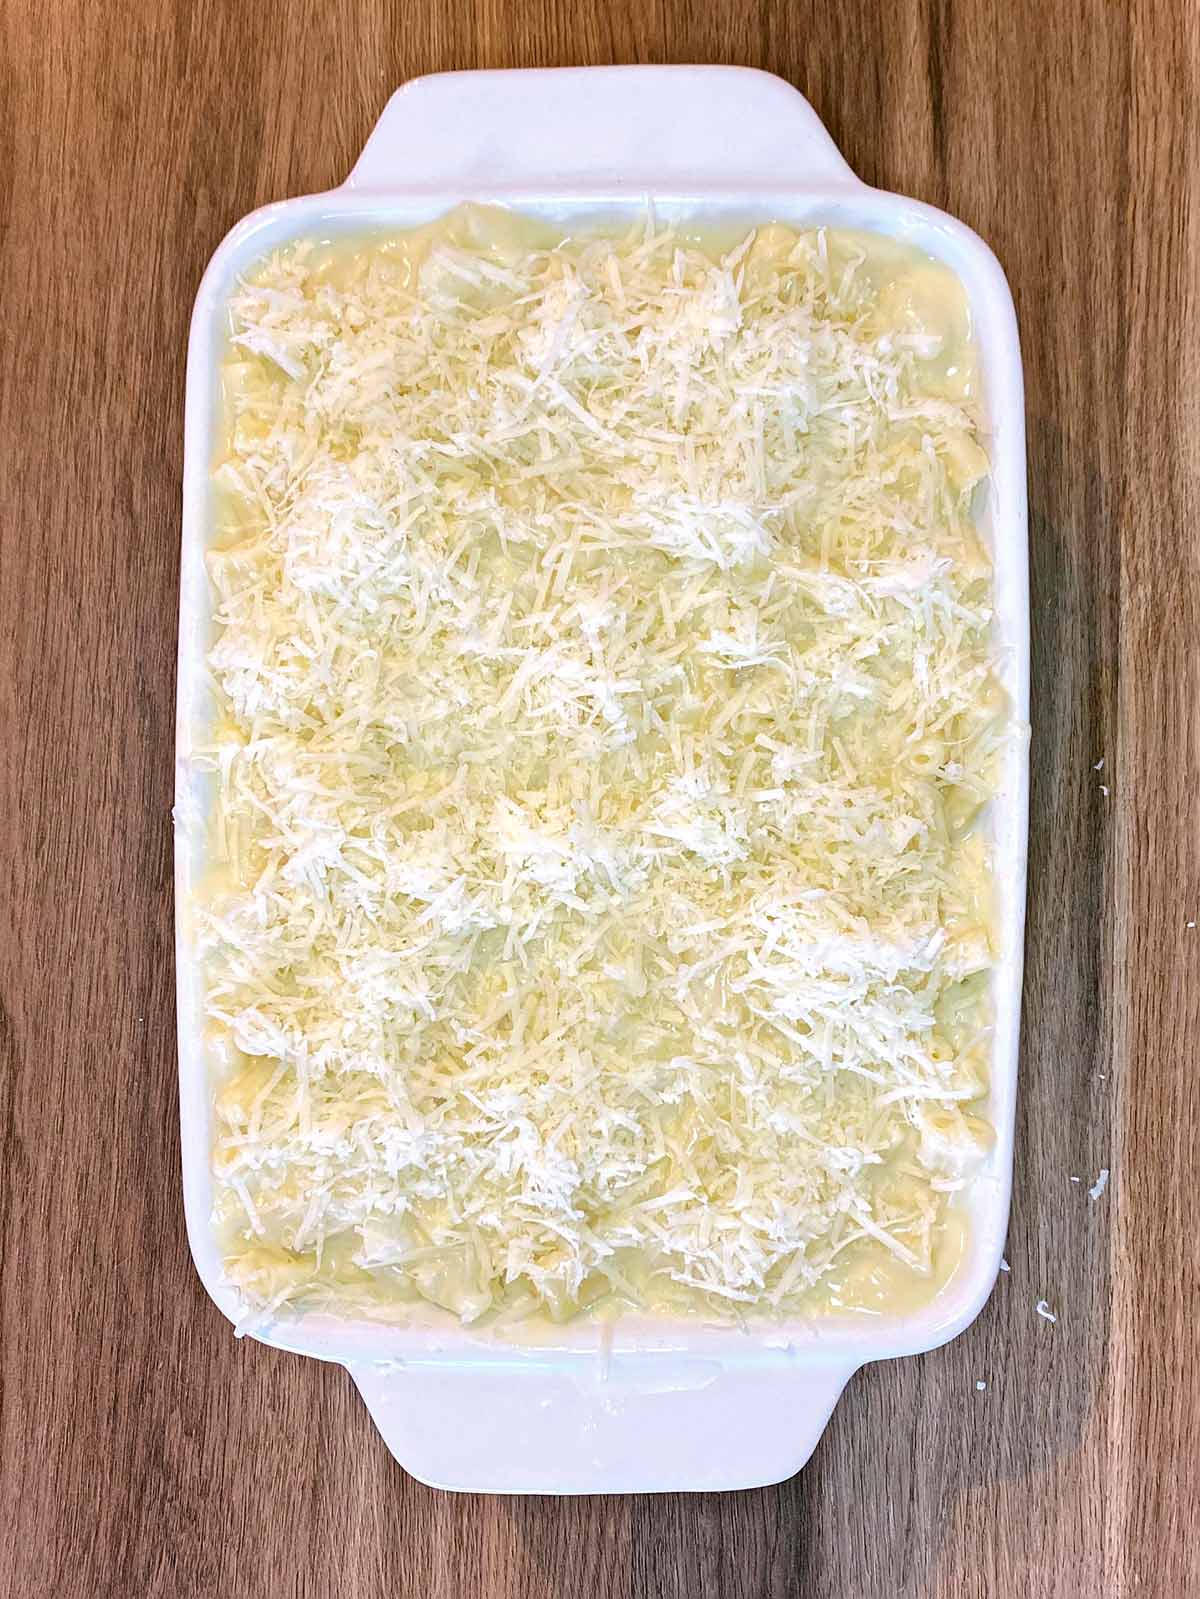 Grated cheese added to the top of the cheesy pasta.